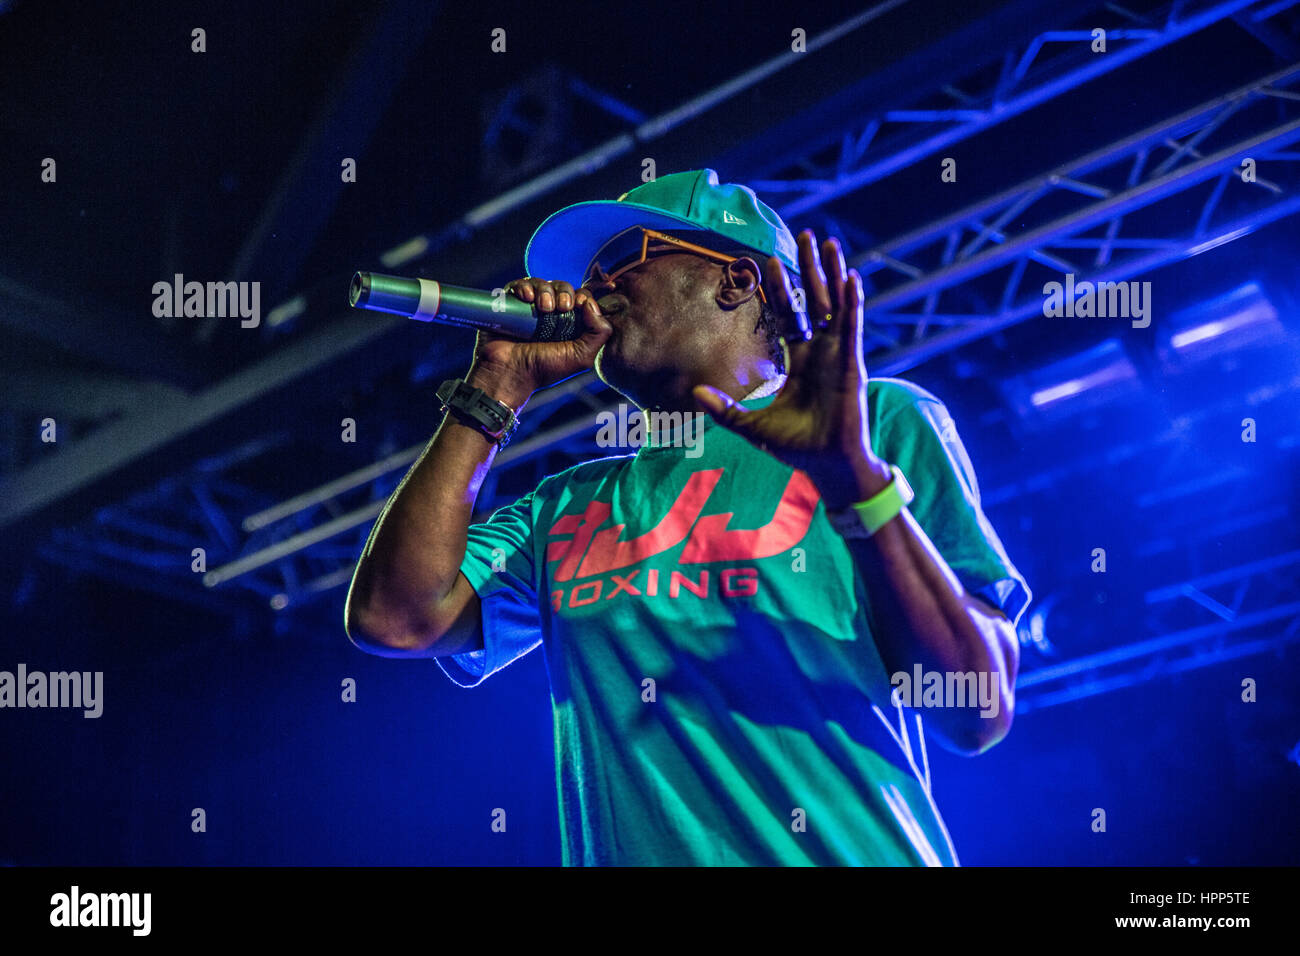 Public Enemy Performing Live At The 02, Liverpool 2015 - Photo By Michelle Roberts Stock Photo